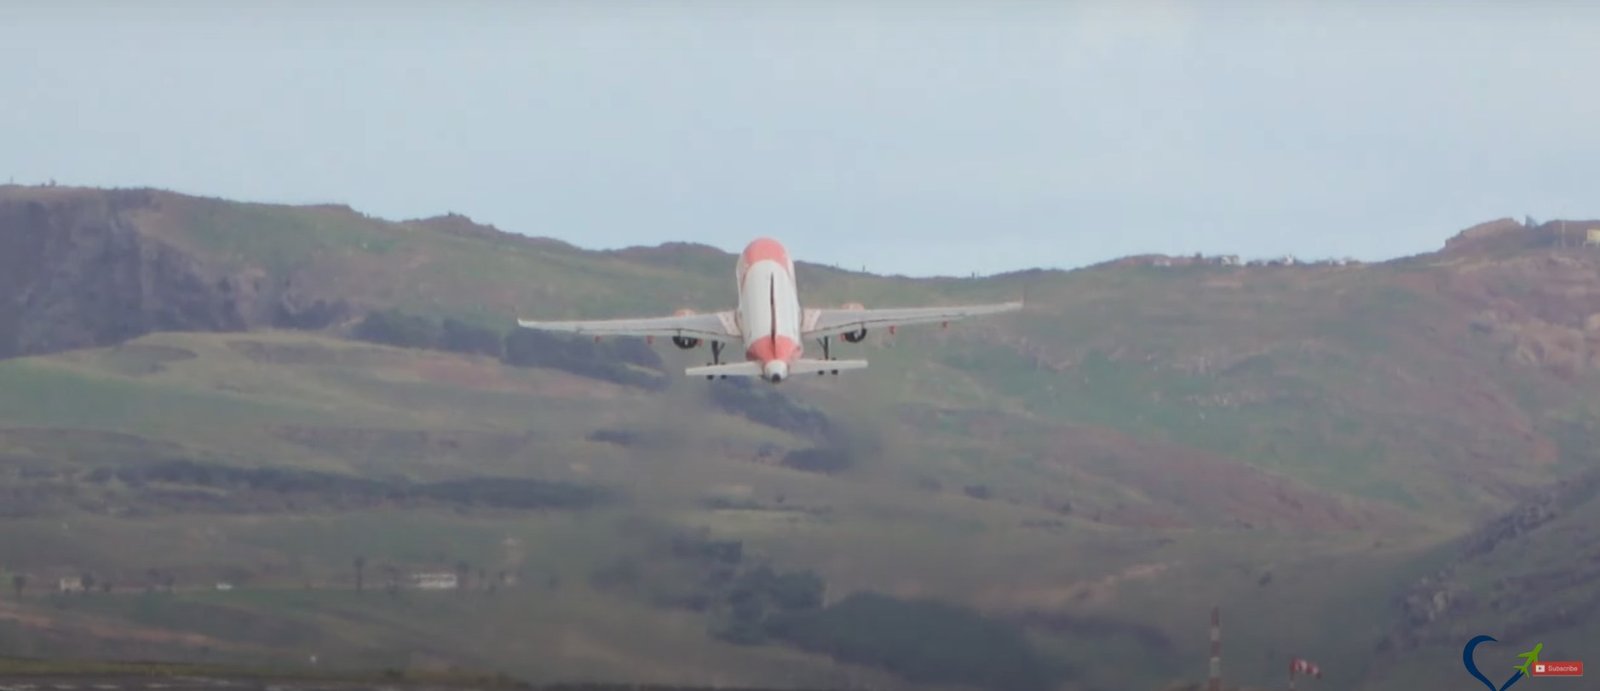 Video Captures Take-Off With Cross Winds at Madeira Airport